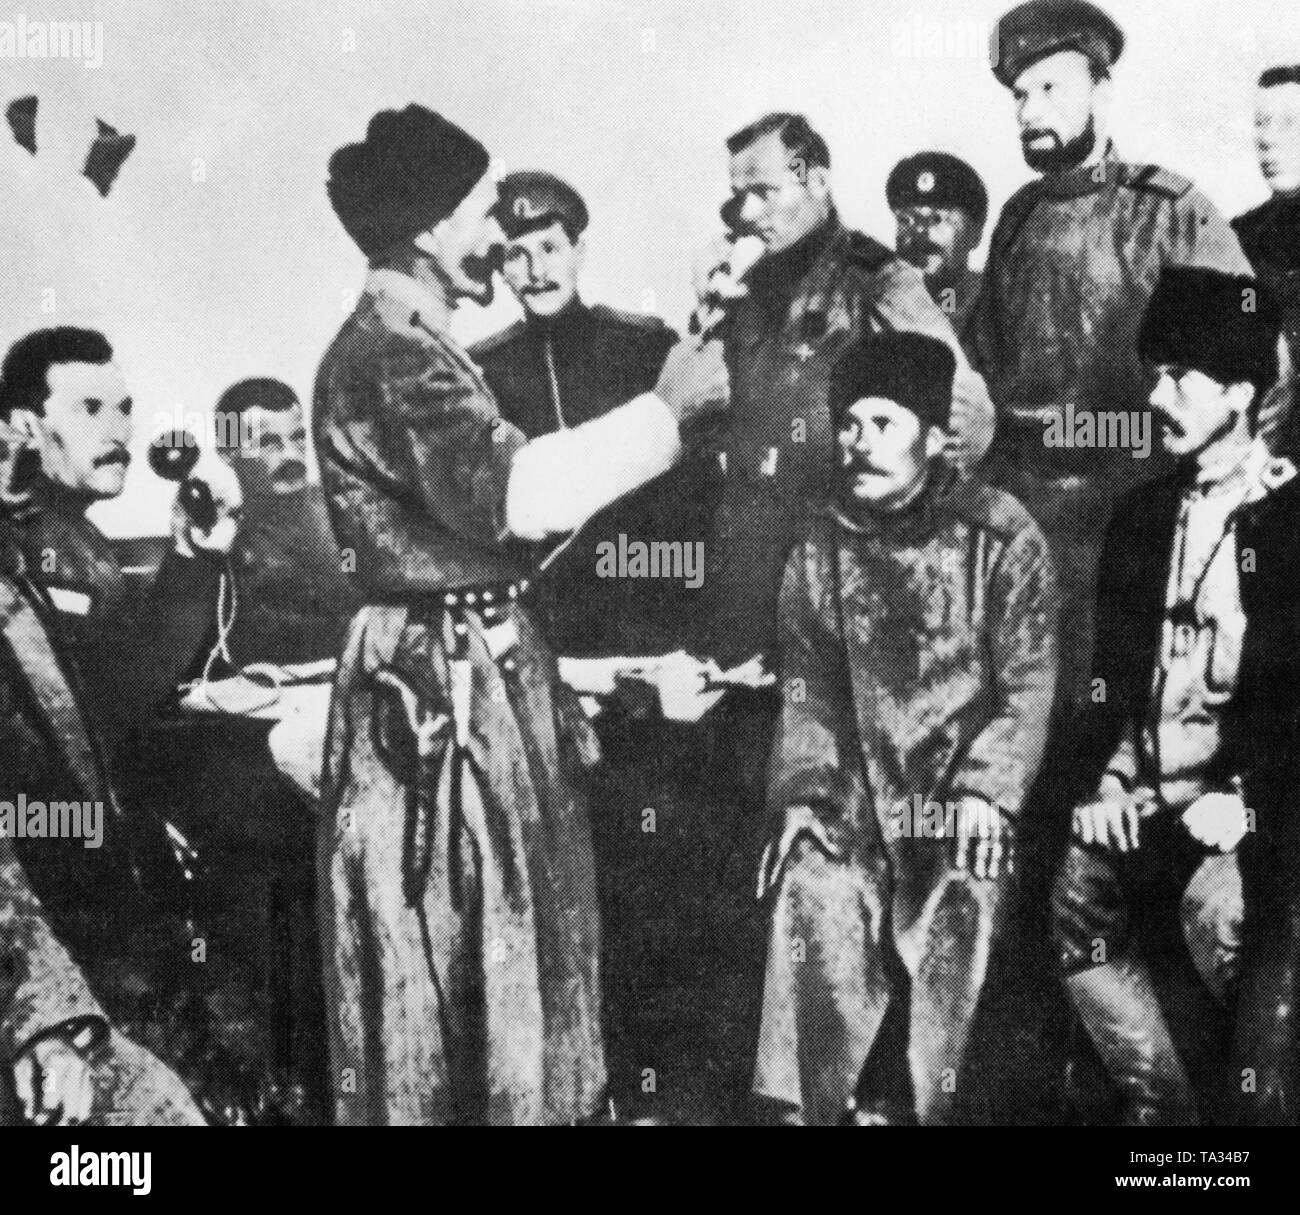 Fraternization of the Kornilov troops with delegates of the revolutionary Petrograd Division. General Lawr Georgyevich Kornilov was commander-in-chief of the Russian armed forces of the Kerensky government on July 20, 1917, and rioted against the provisional government between September 9 and 17. Stock Photo